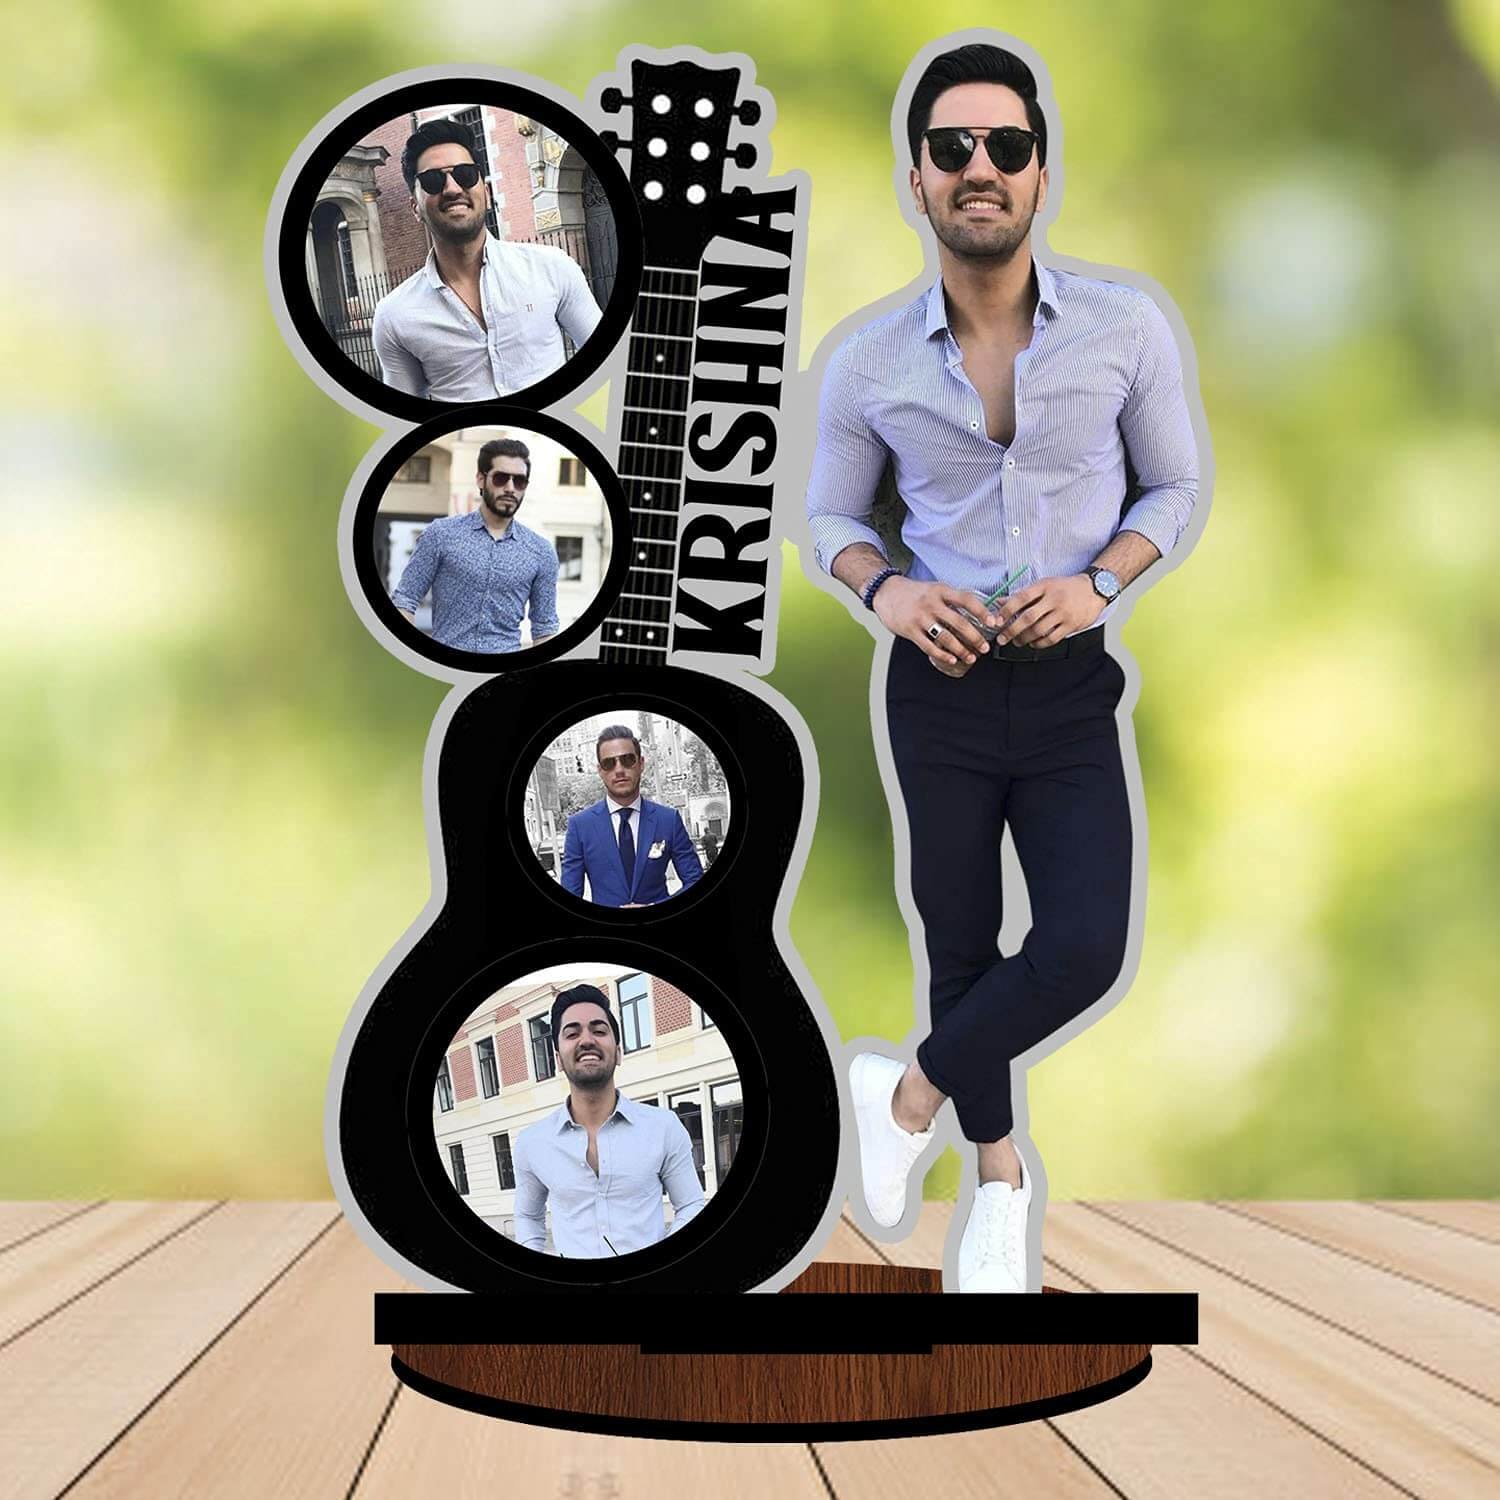 https://shoppingyatra.com/product_images/Guitar Photo Frame Standee Cutout Caricature MDF Wood Personalized Gift Customized with Your Photos & Name ( 9 x 12 inch )1.jpg